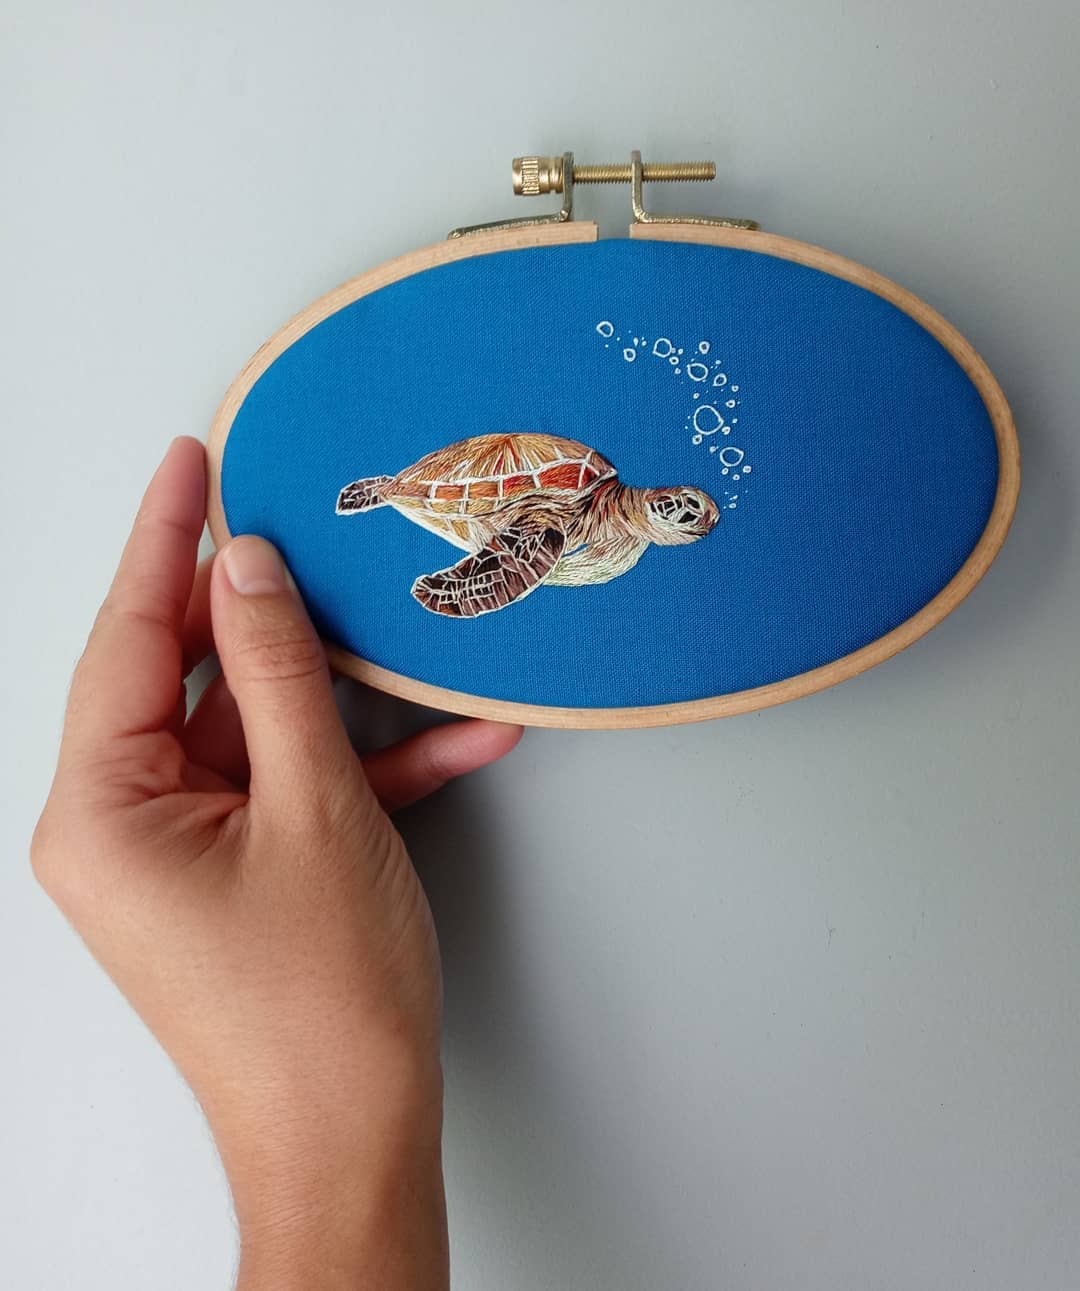 Gorgeous Embroideries Of Animals Plunging Into The Waters By Megan Zaniewski 5